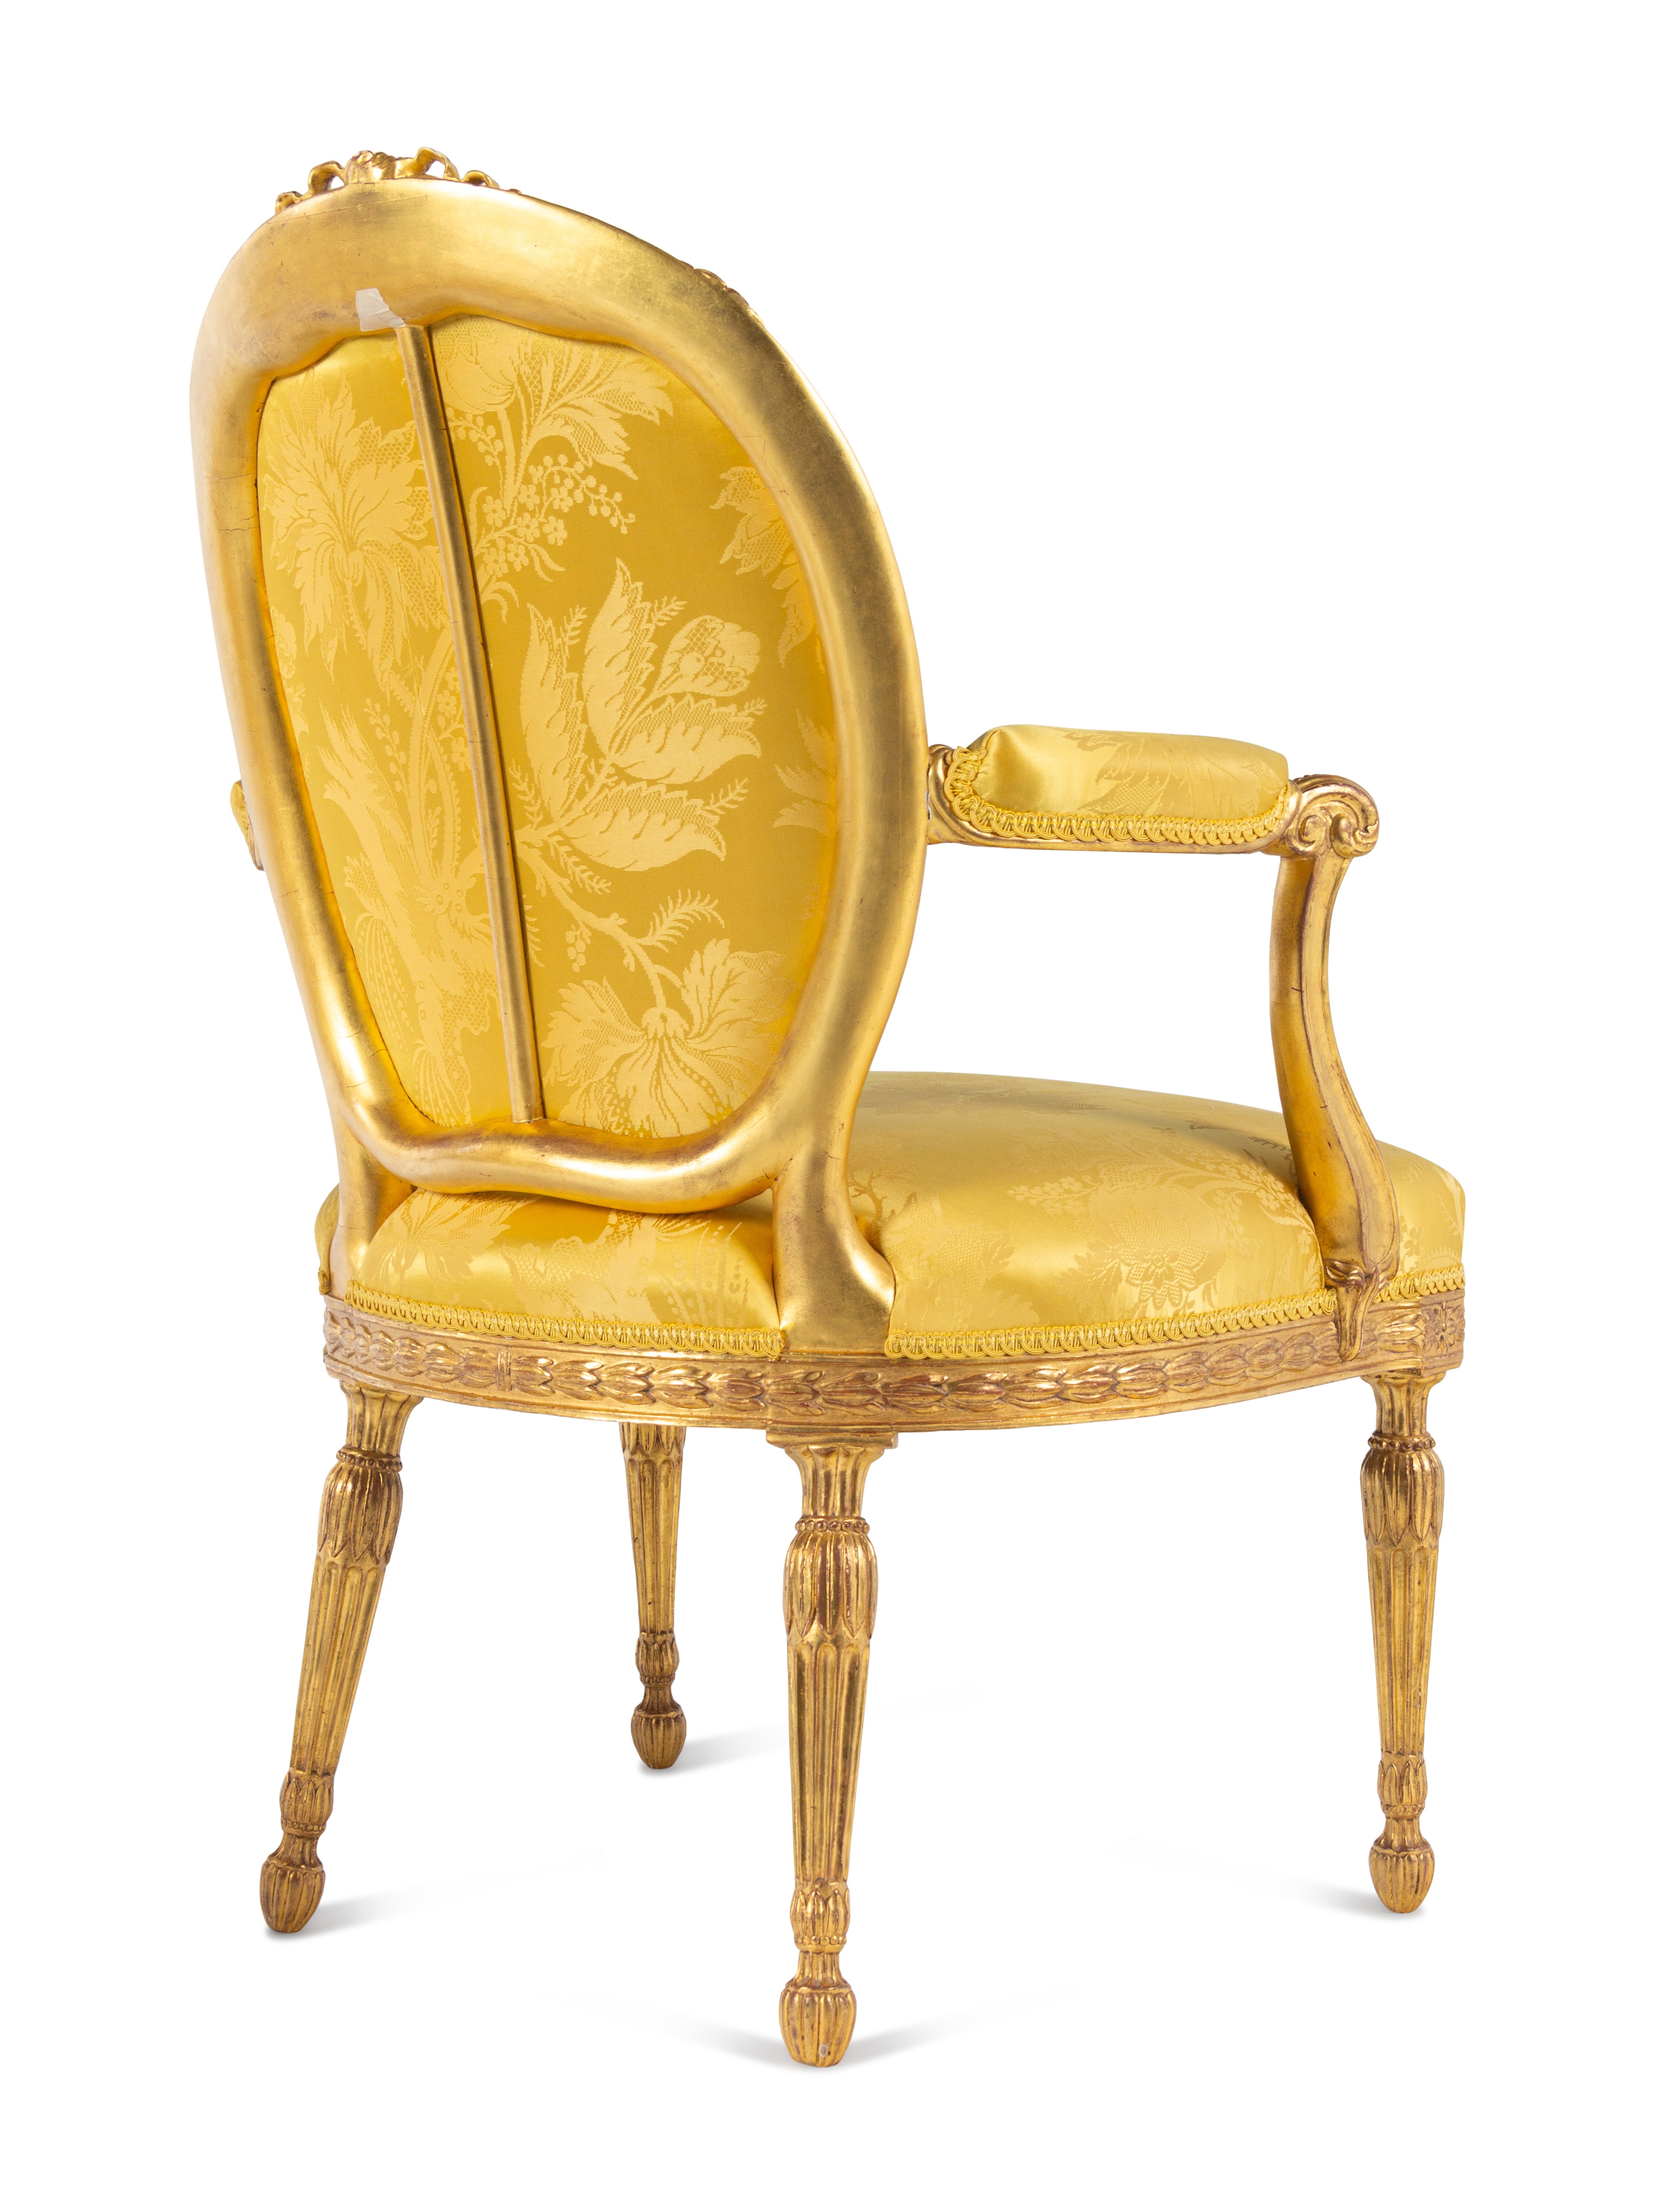 A Pair of George III Carved Giltwood Armchairs - Image 4 of 14